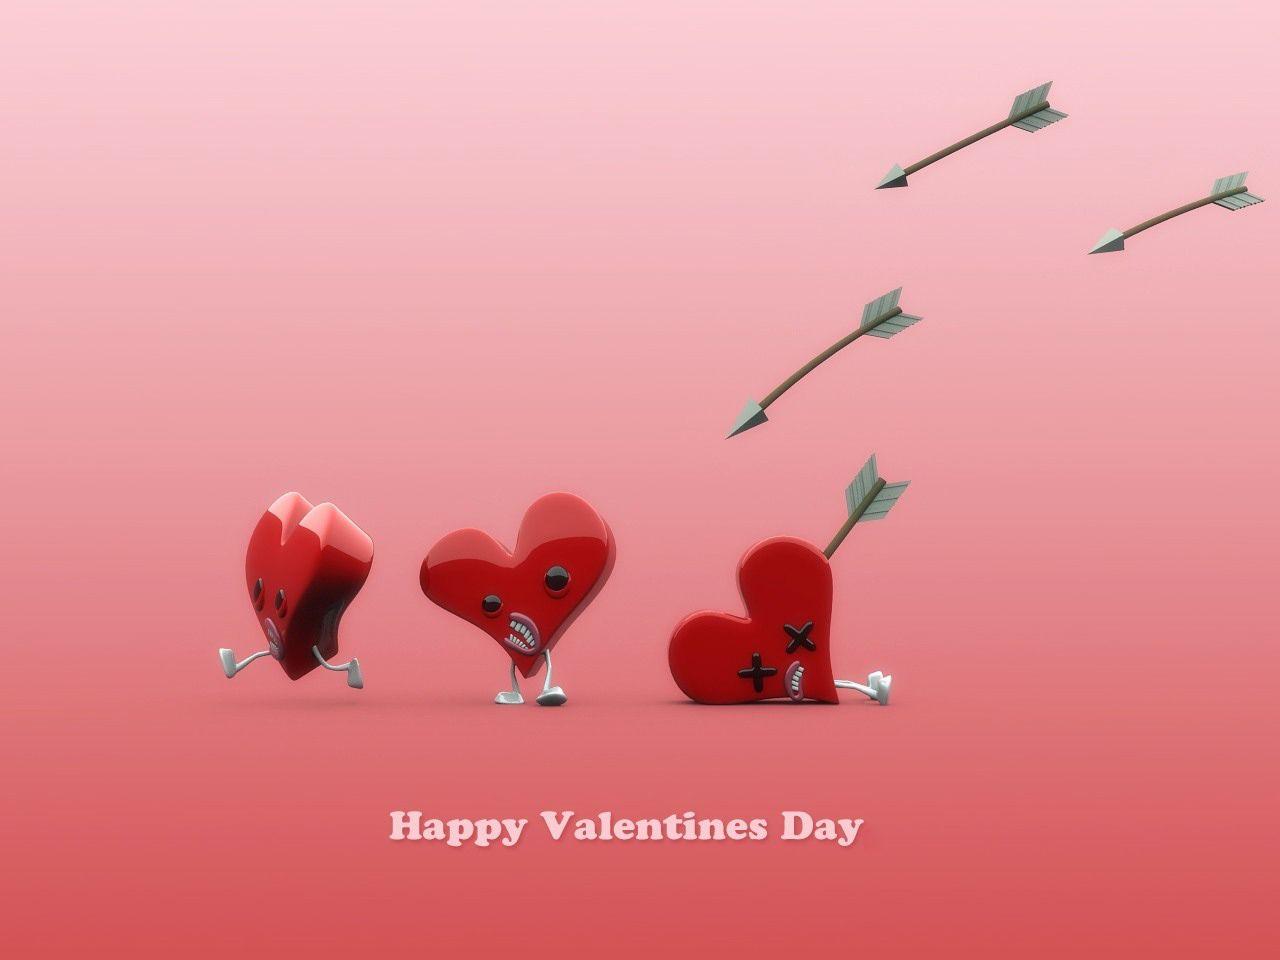 Hilarious Valentines Day Wallpapers and Pictures